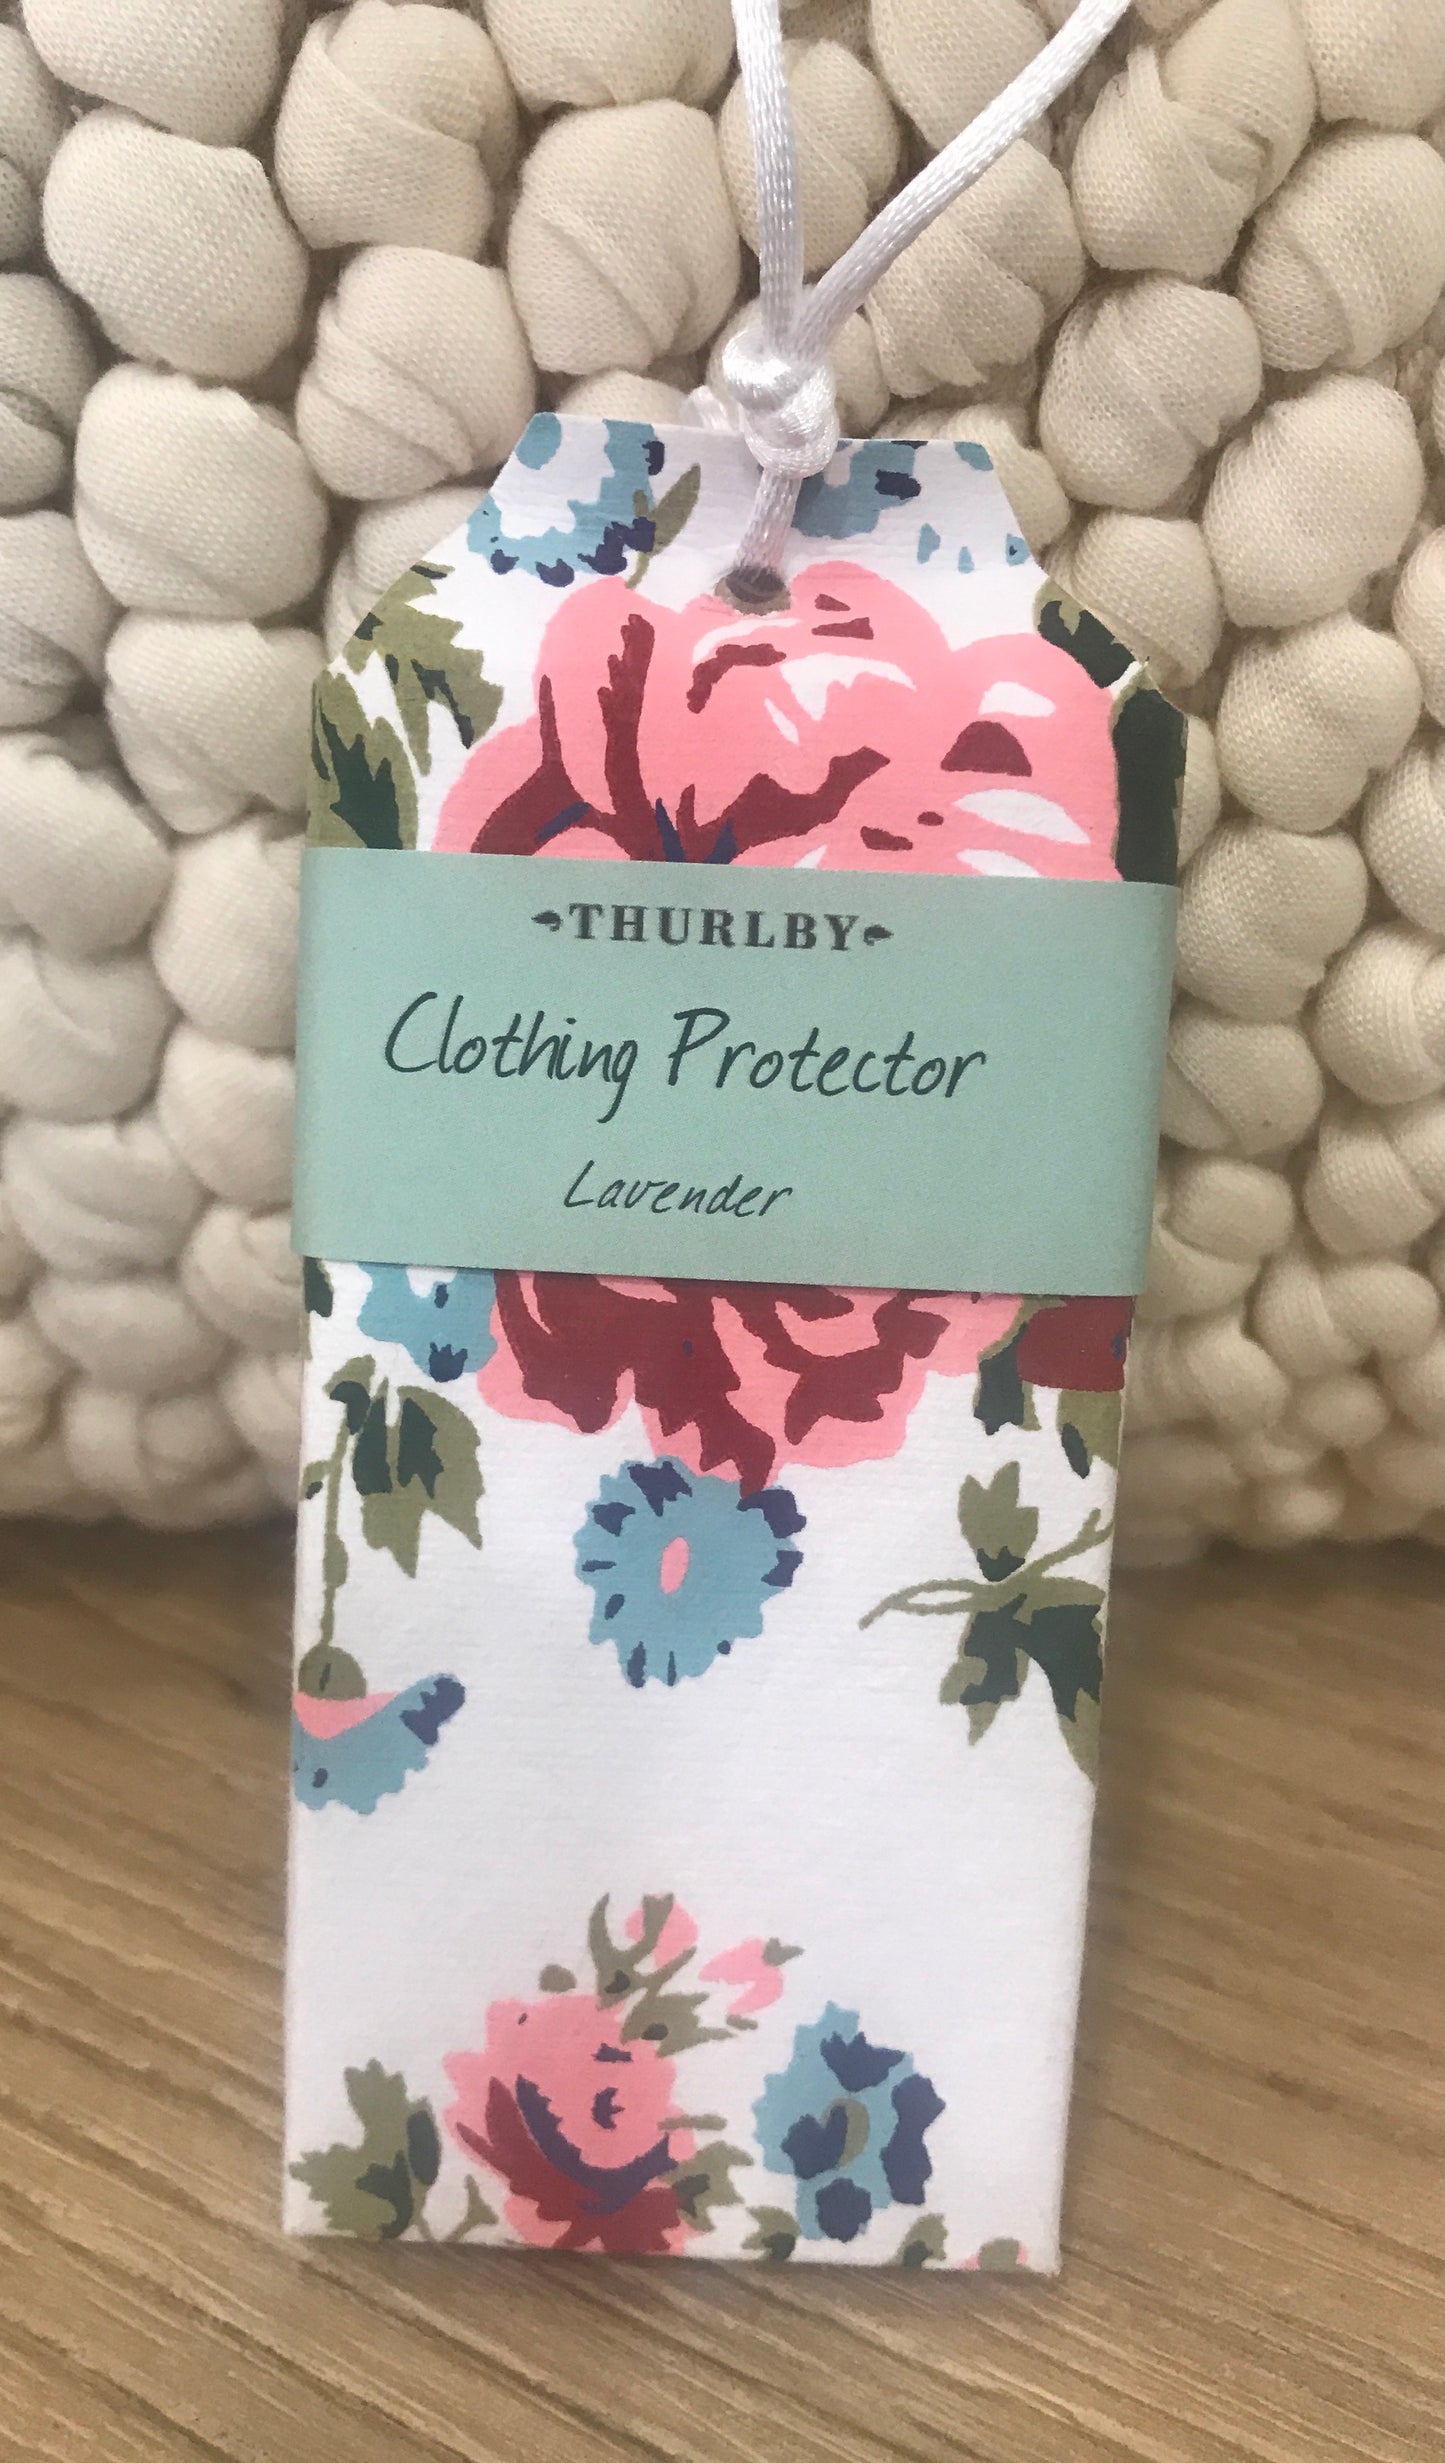 Clothing Protector - Thurlby